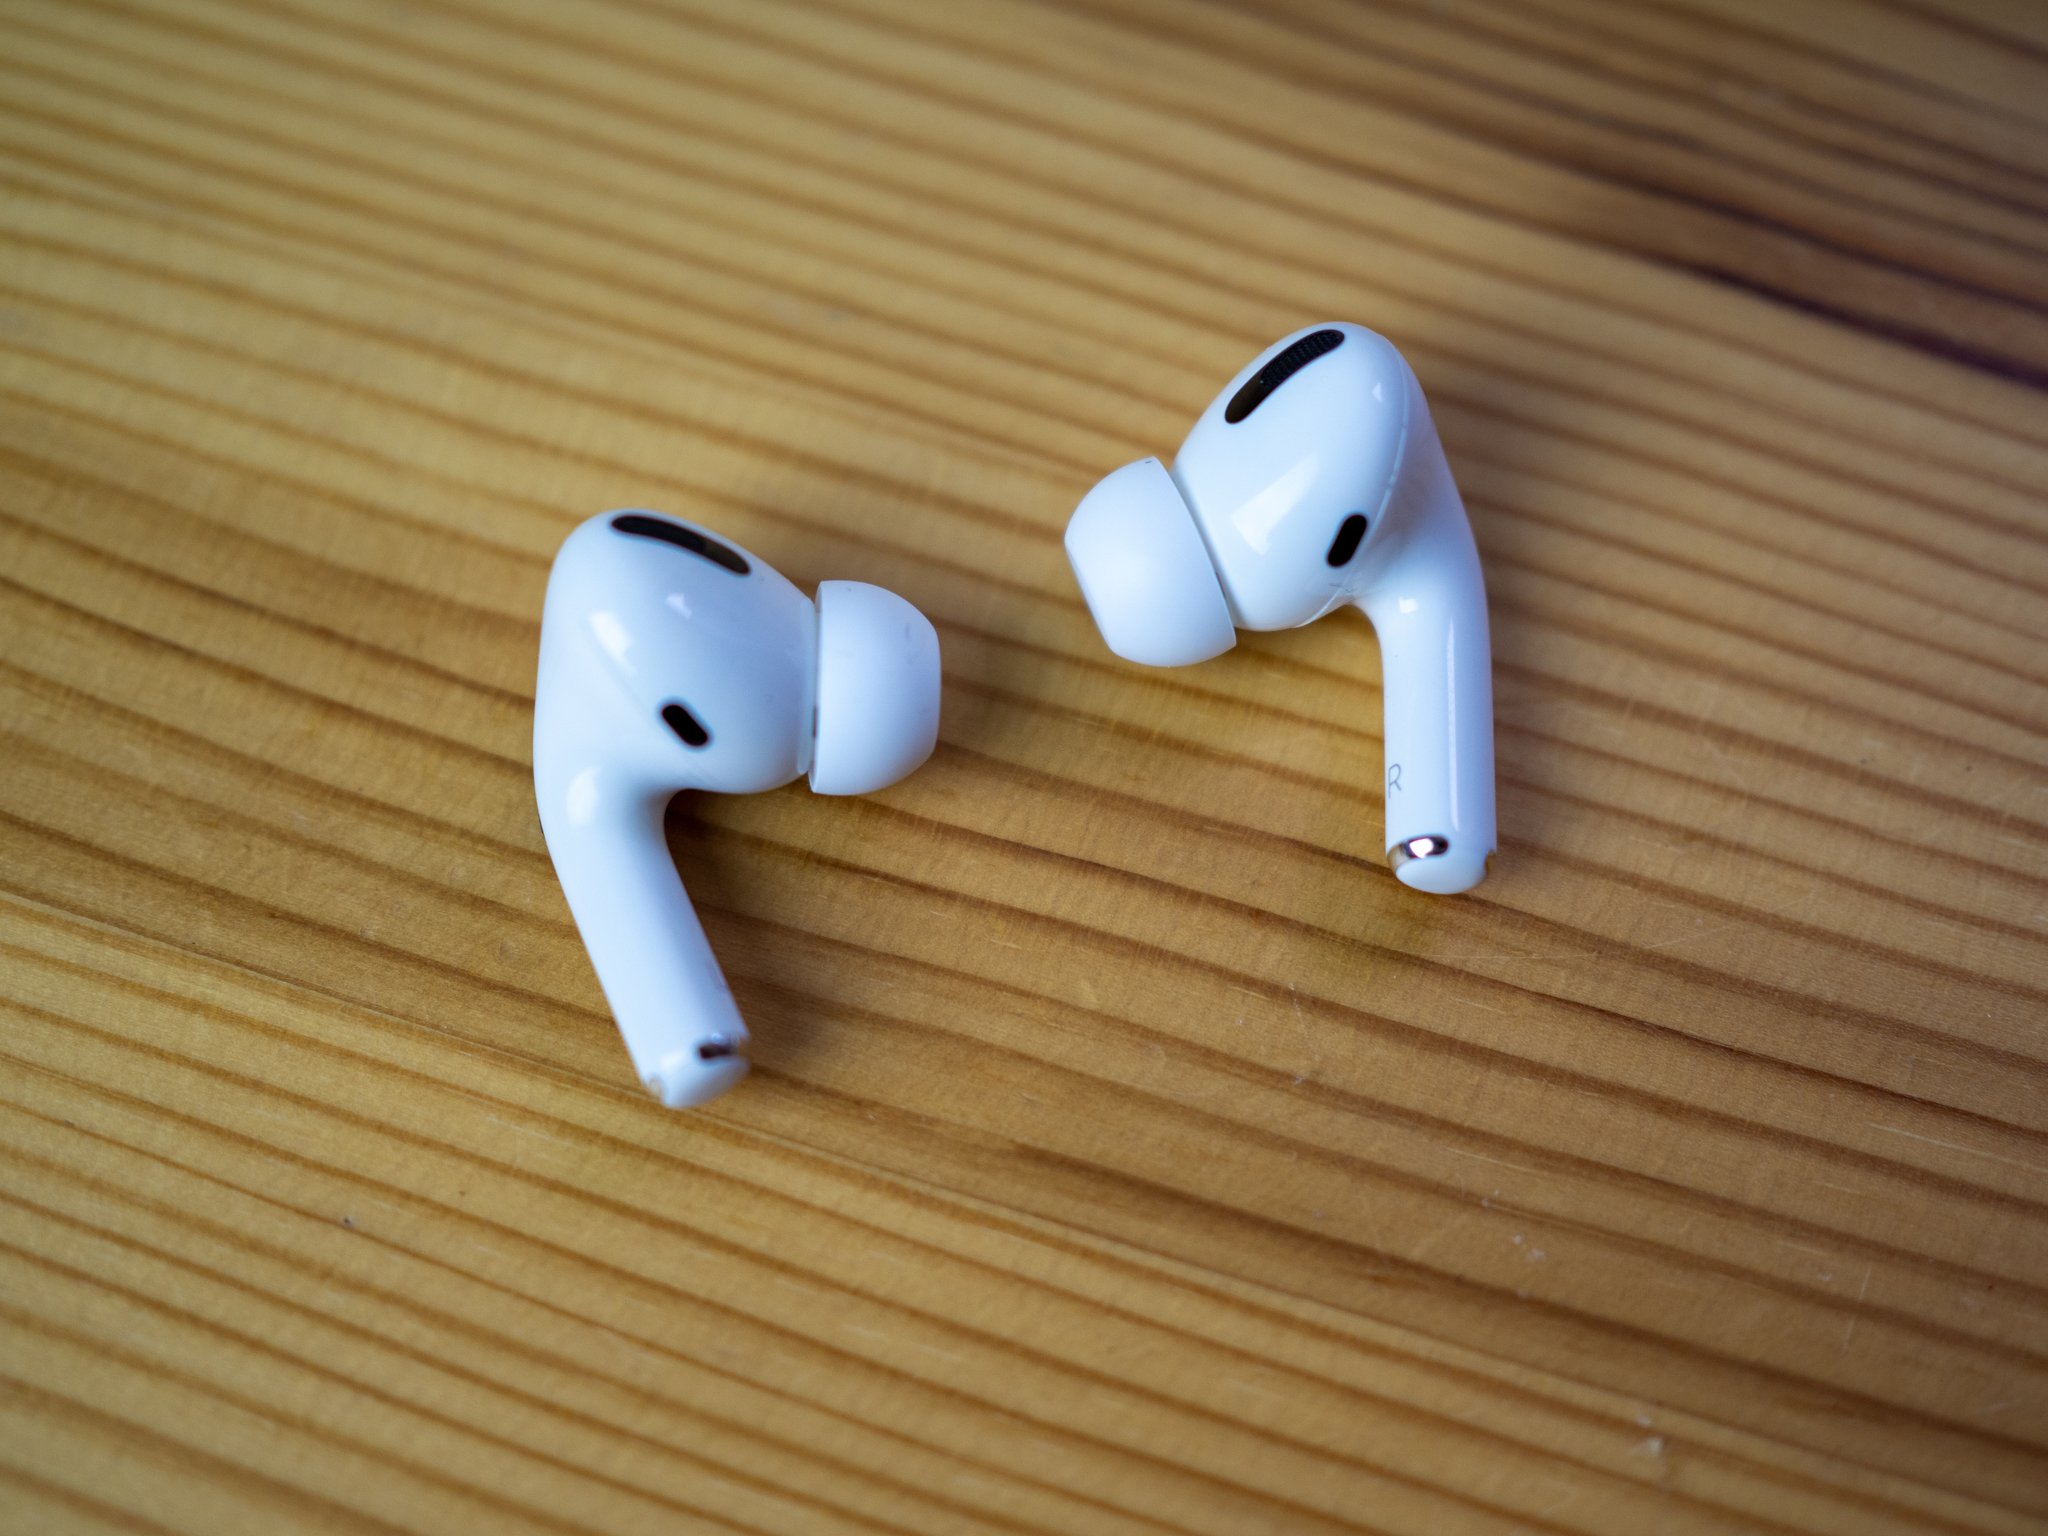 Samsung Galaxy Buds Live vs. AirPods Pro: Which should you buy